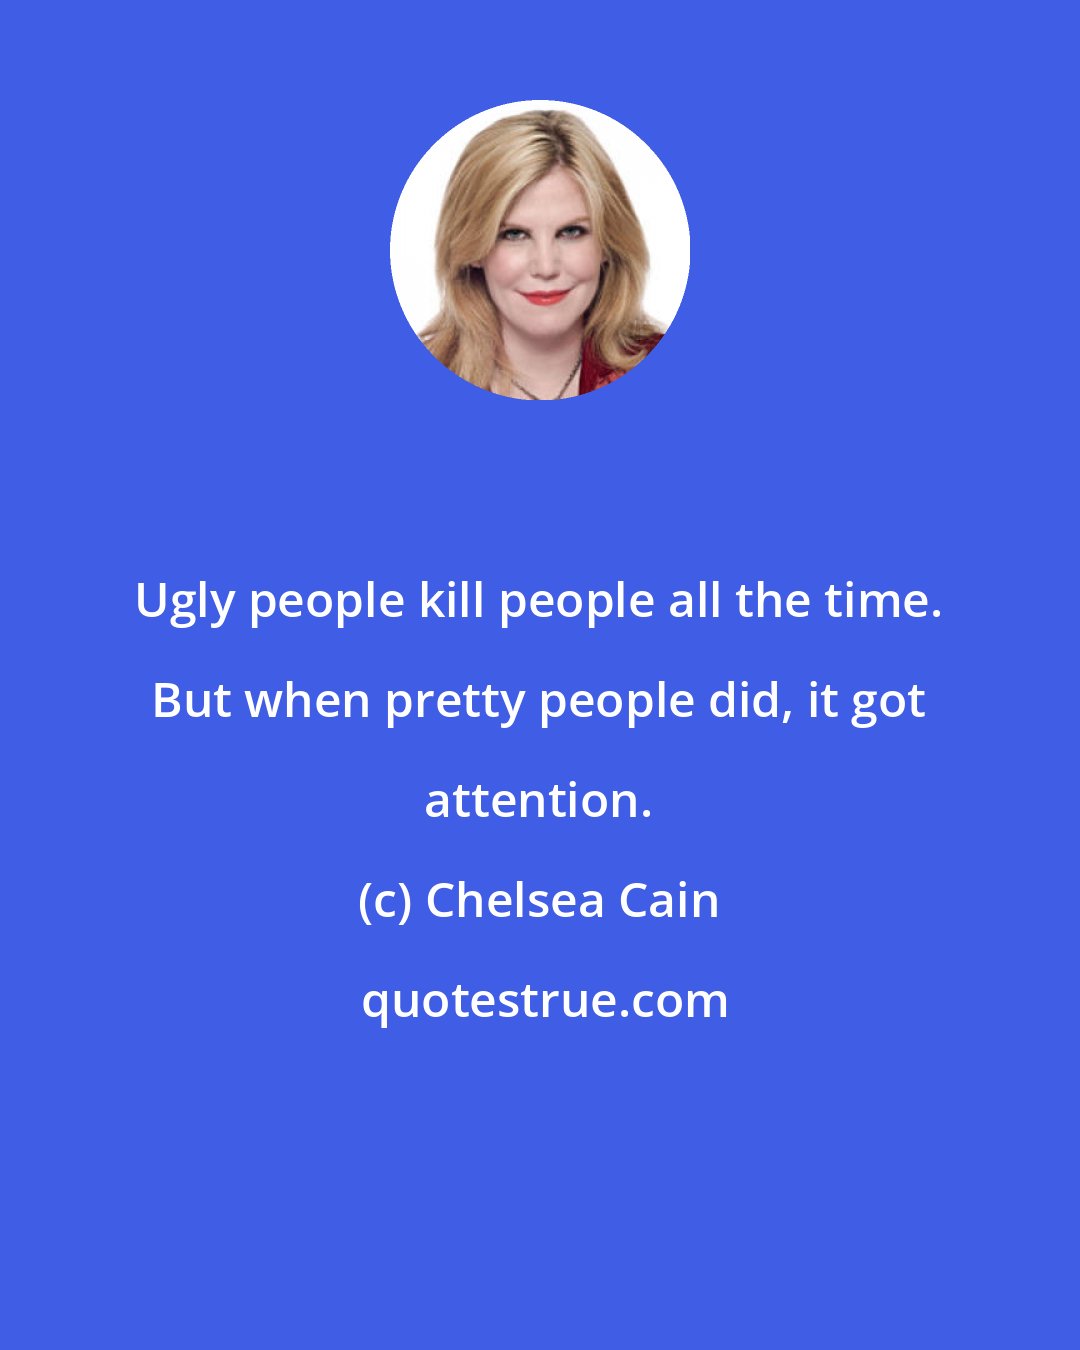 Chelsea Cain: Ugly people kill people all the time. But when pretty people did, it got attention.